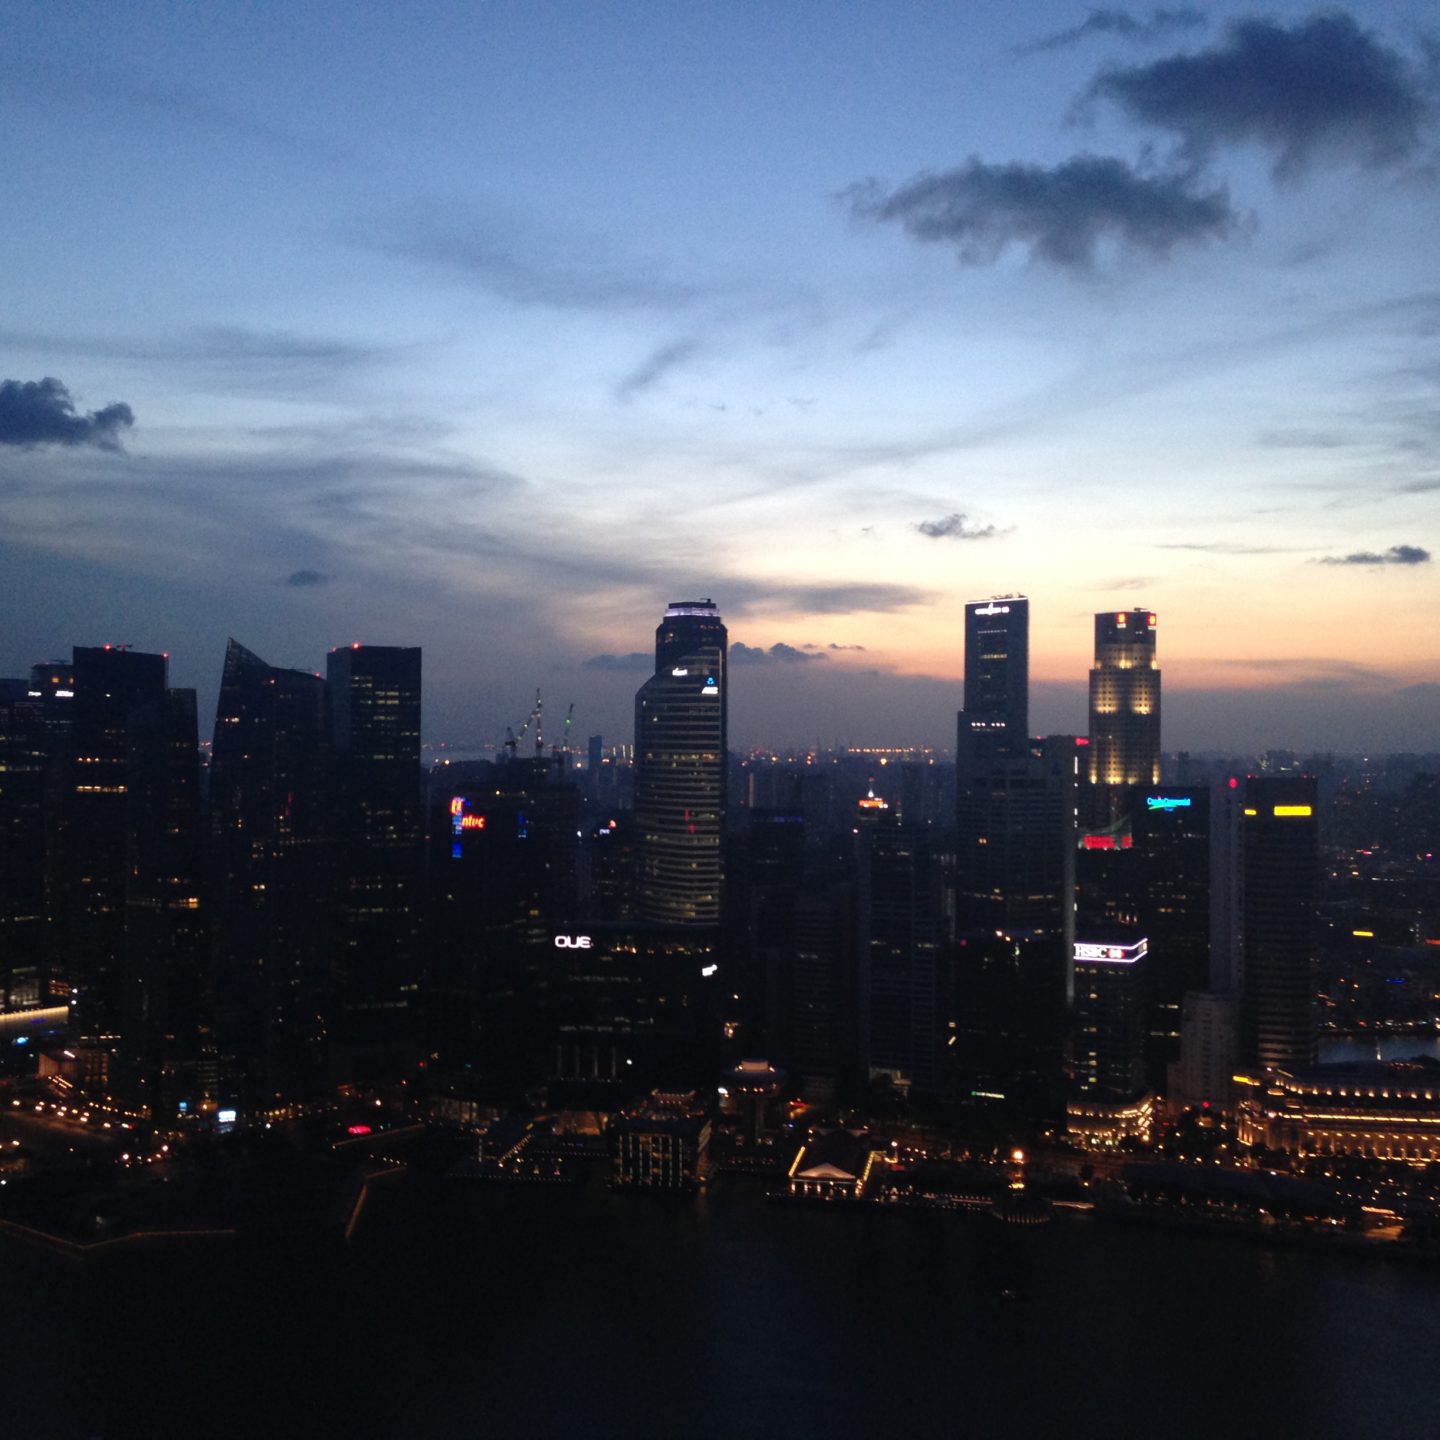 Singapore: Day One